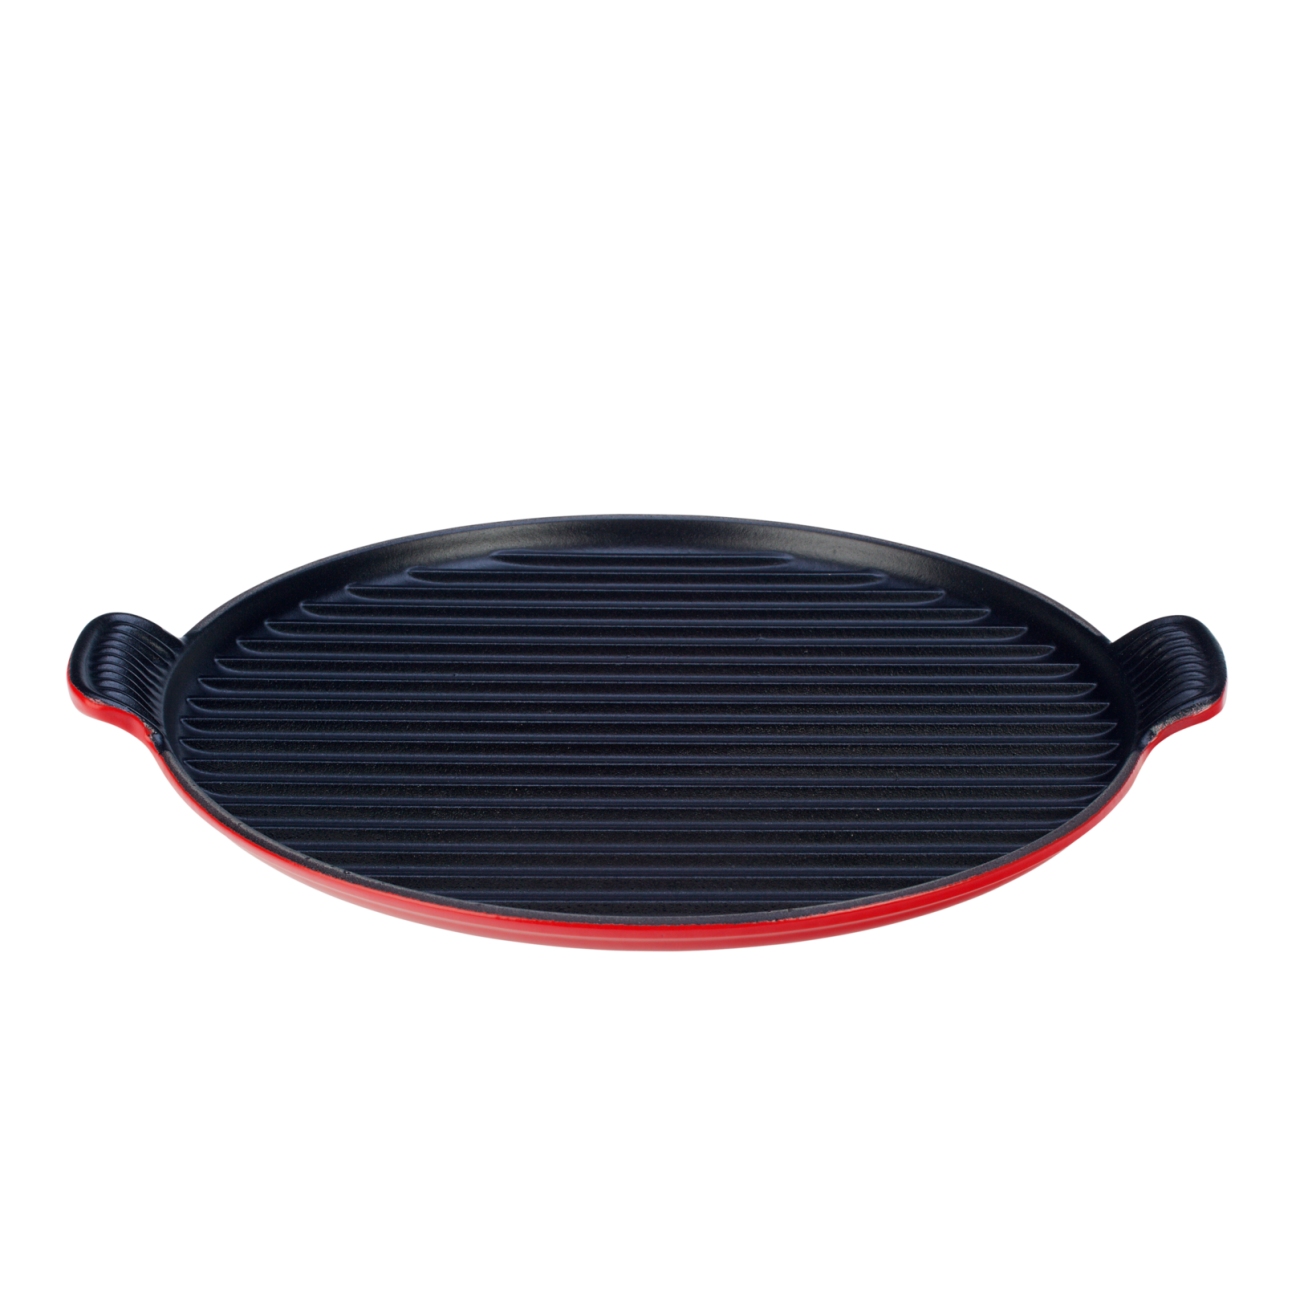 https://www.tattahome.com/50103-large_default/le-creuset-round-grill-extralarge-32-cherry.jpg